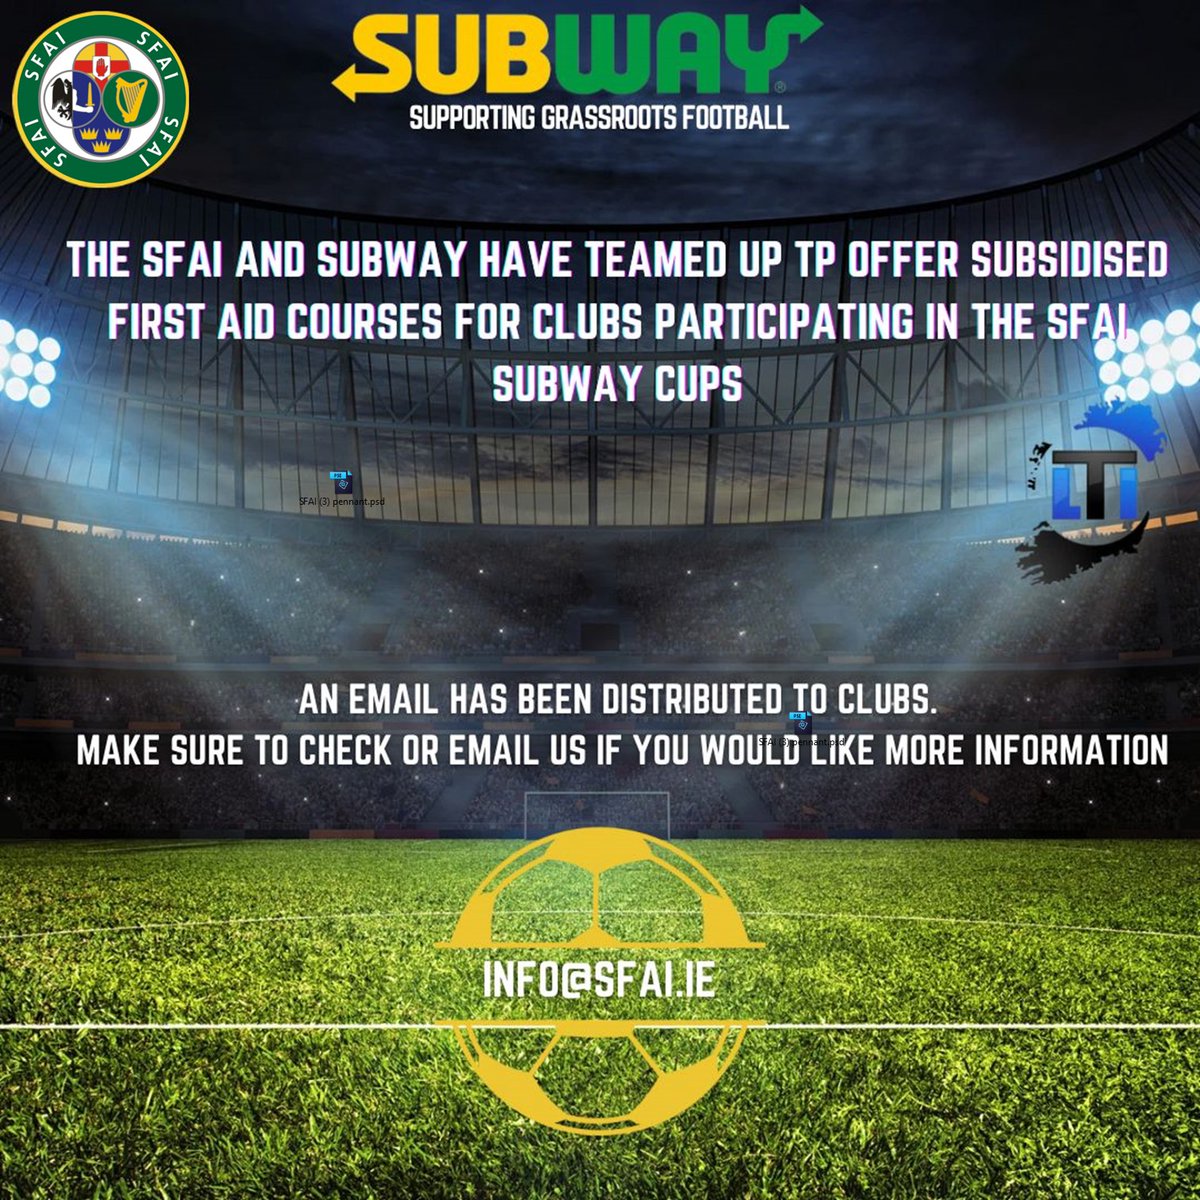 The SFAI & SUBWAY teamed up to offer subsidised First Aid Courses for clubs participating in the SFAI SUBWAY Cups. An email distributed to clubs, check or contact us info@sfai.ie @IrelandLeisure - a nationwide provider. @SubwayROI #sfaiSUBWAY